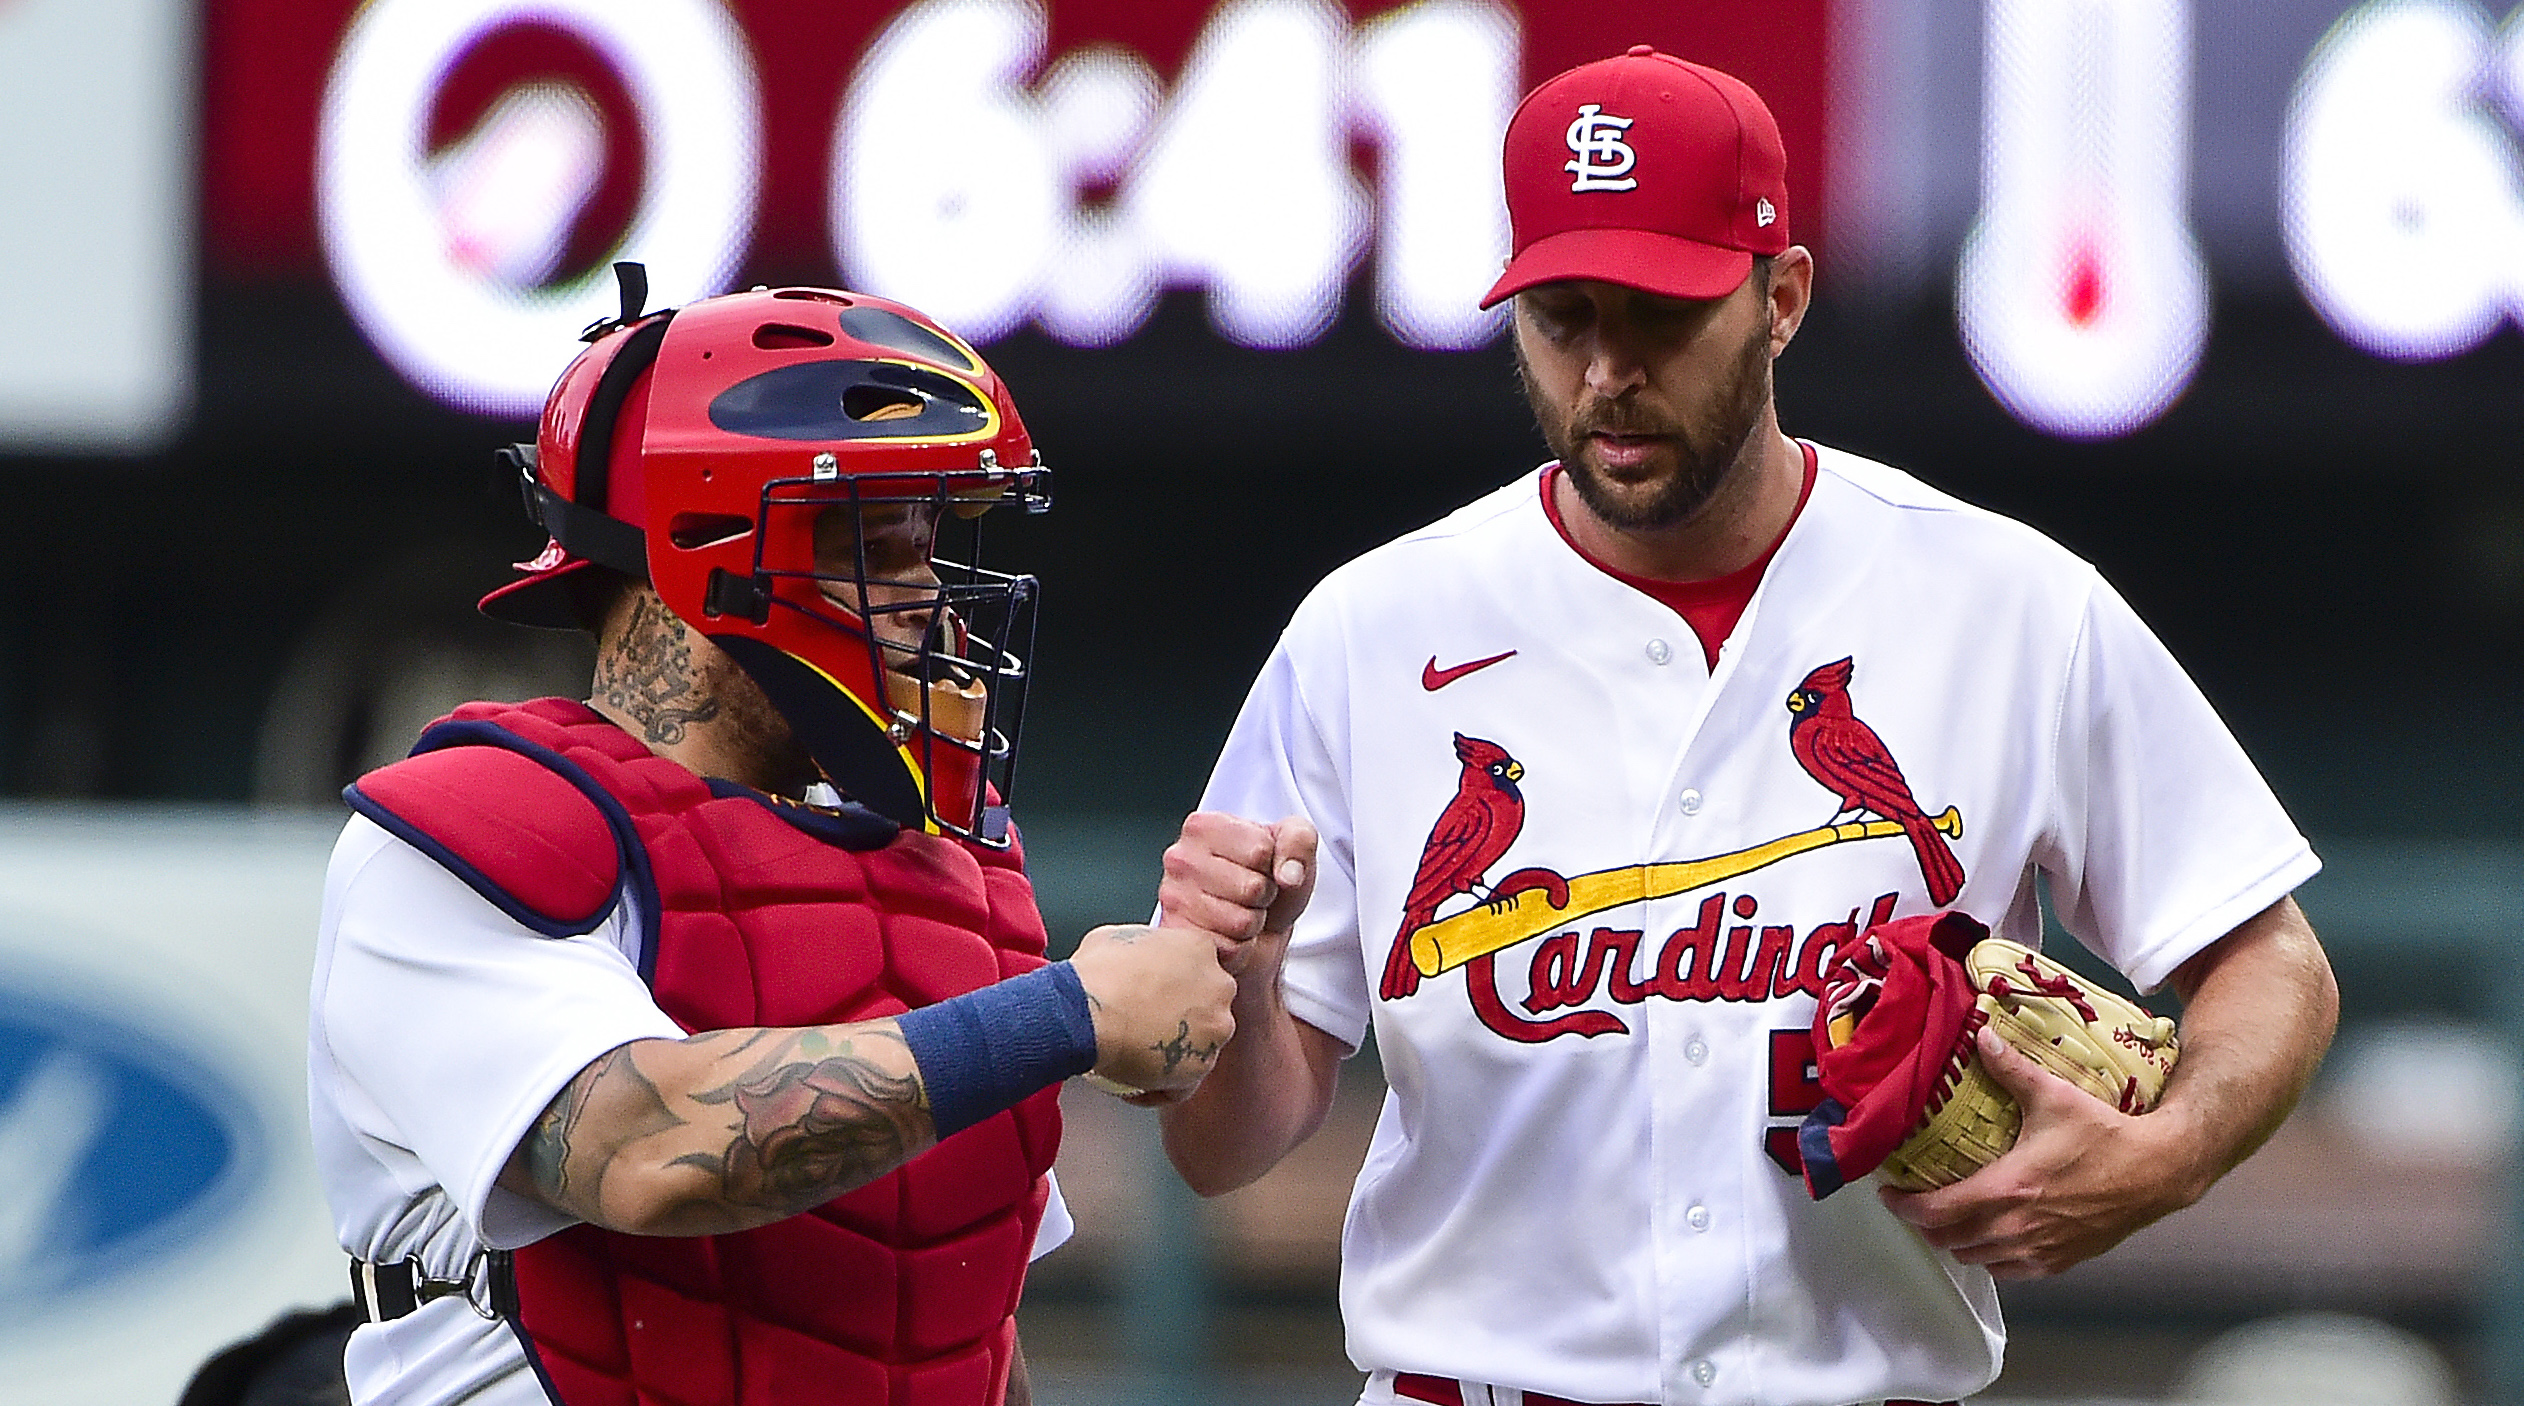 St. Louis Cardinals starting pitcher Adam Wainwright (R) bumps fists with  catcher Yadier Molina as they walk in from the bullpen before a game  against the Washington Nationals at Busch Stadium in